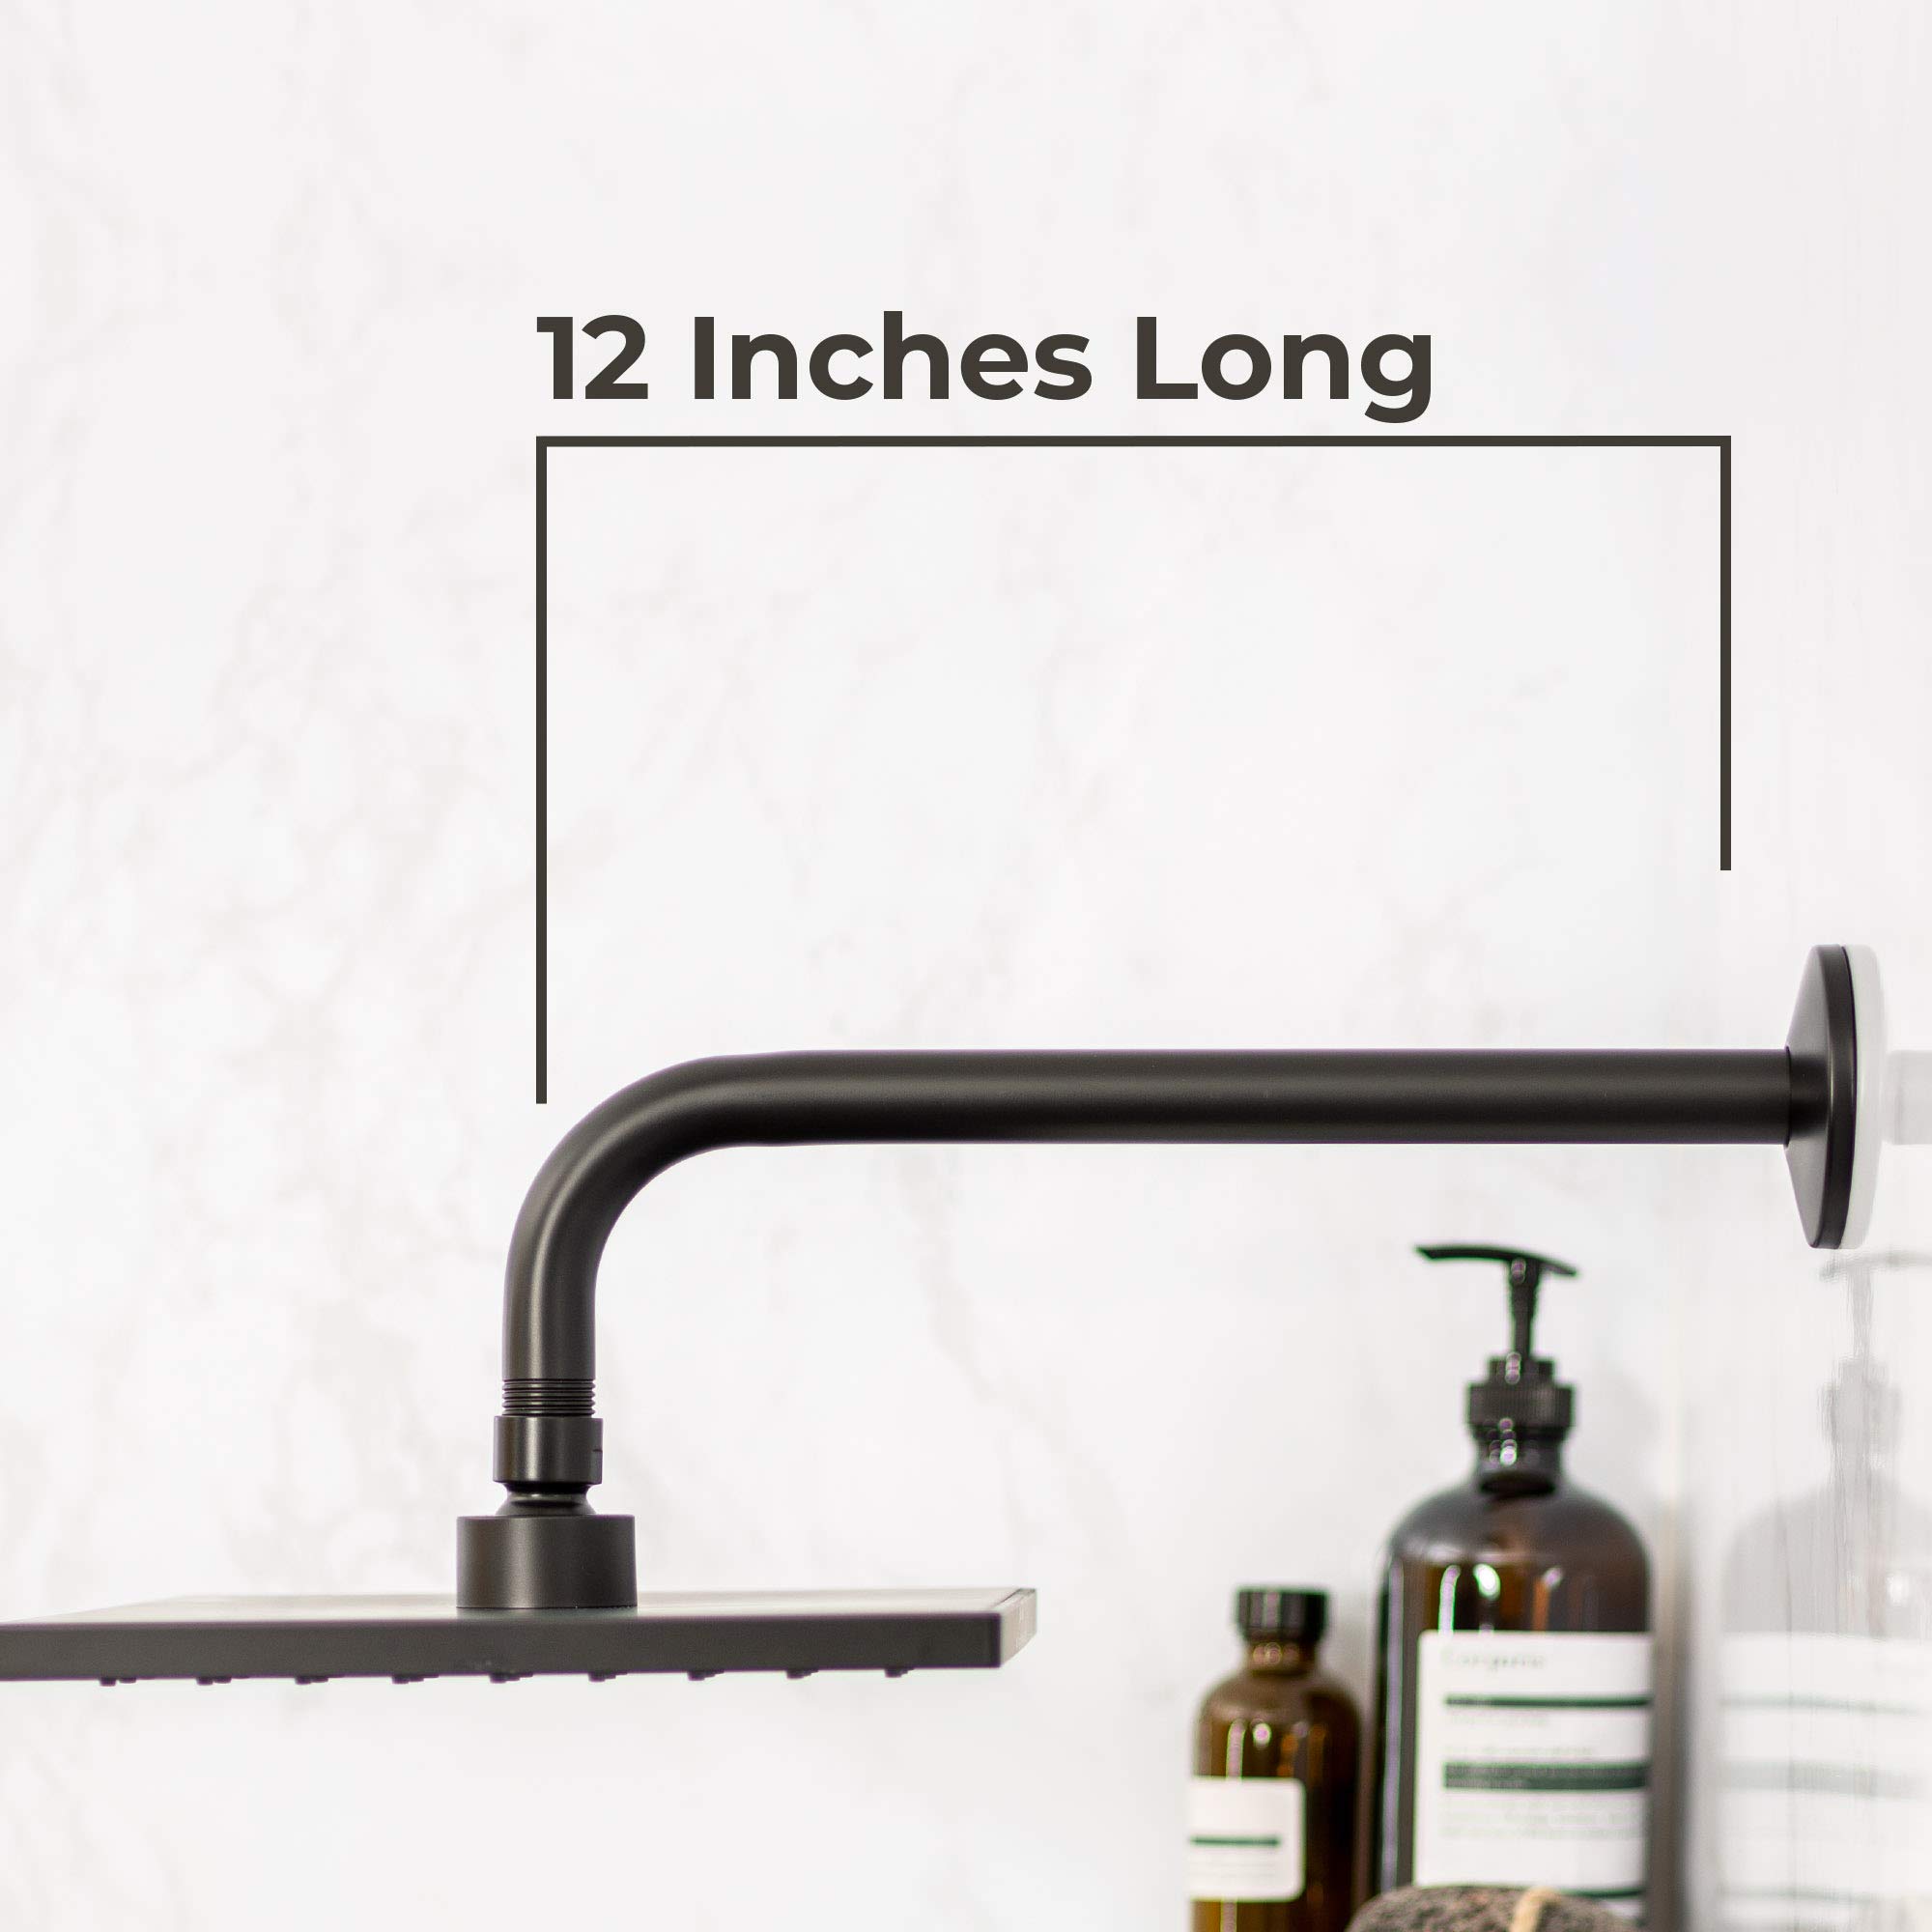 L-Shaped Shower Arm Extension, 12-Inch Length, Great for Rainfall and Adjustable Showerheads, Matte Black Finish